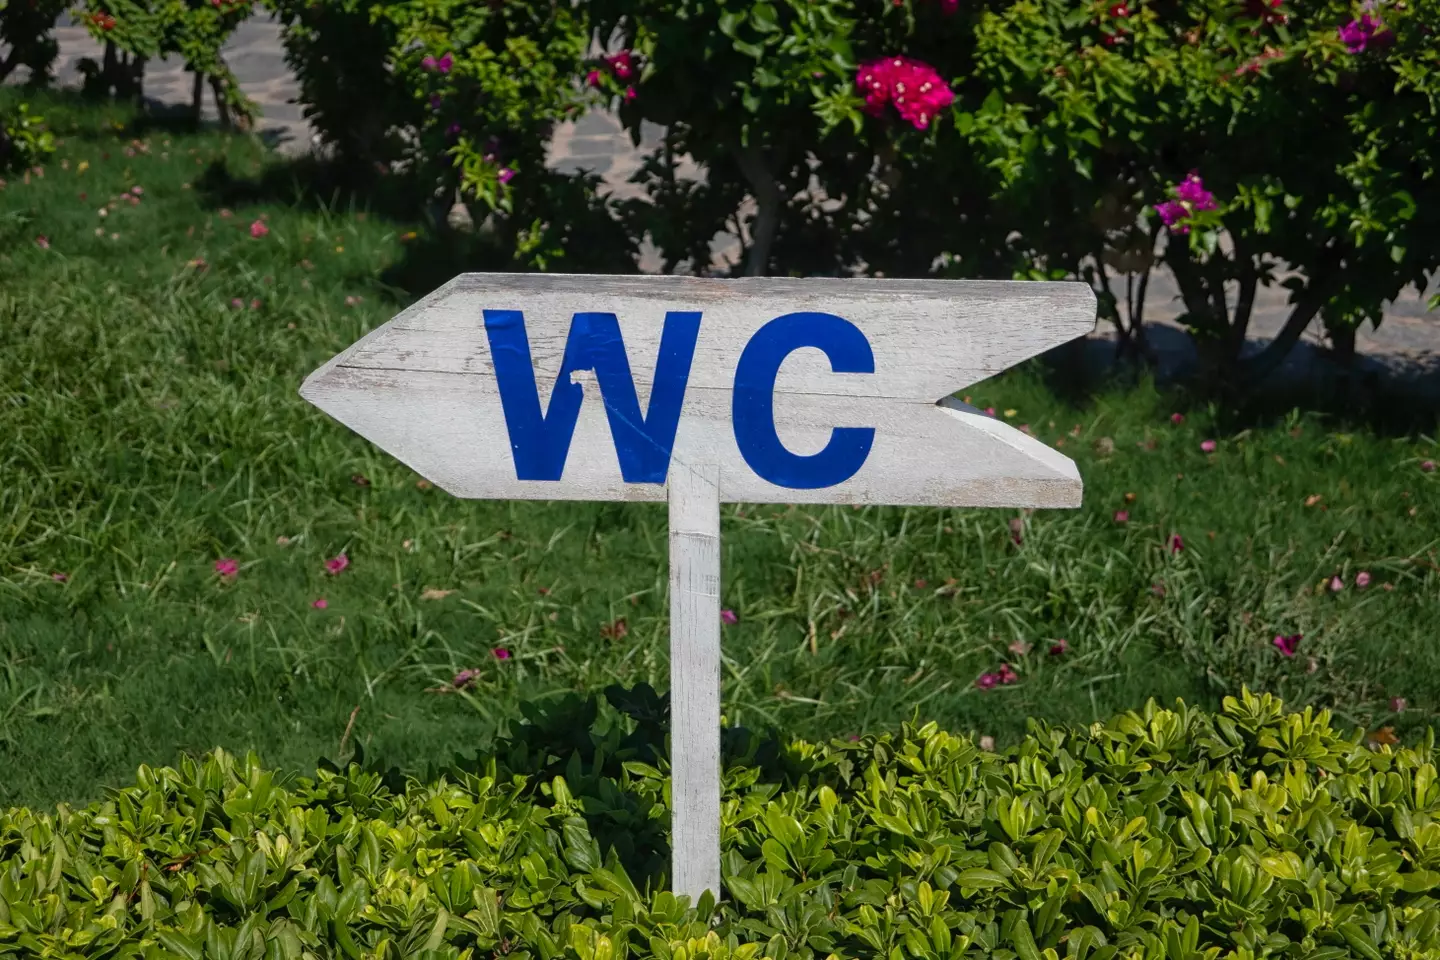 WC, or 'water closet', is basically just a term for the toilet that basically nobody would ever say out loud.